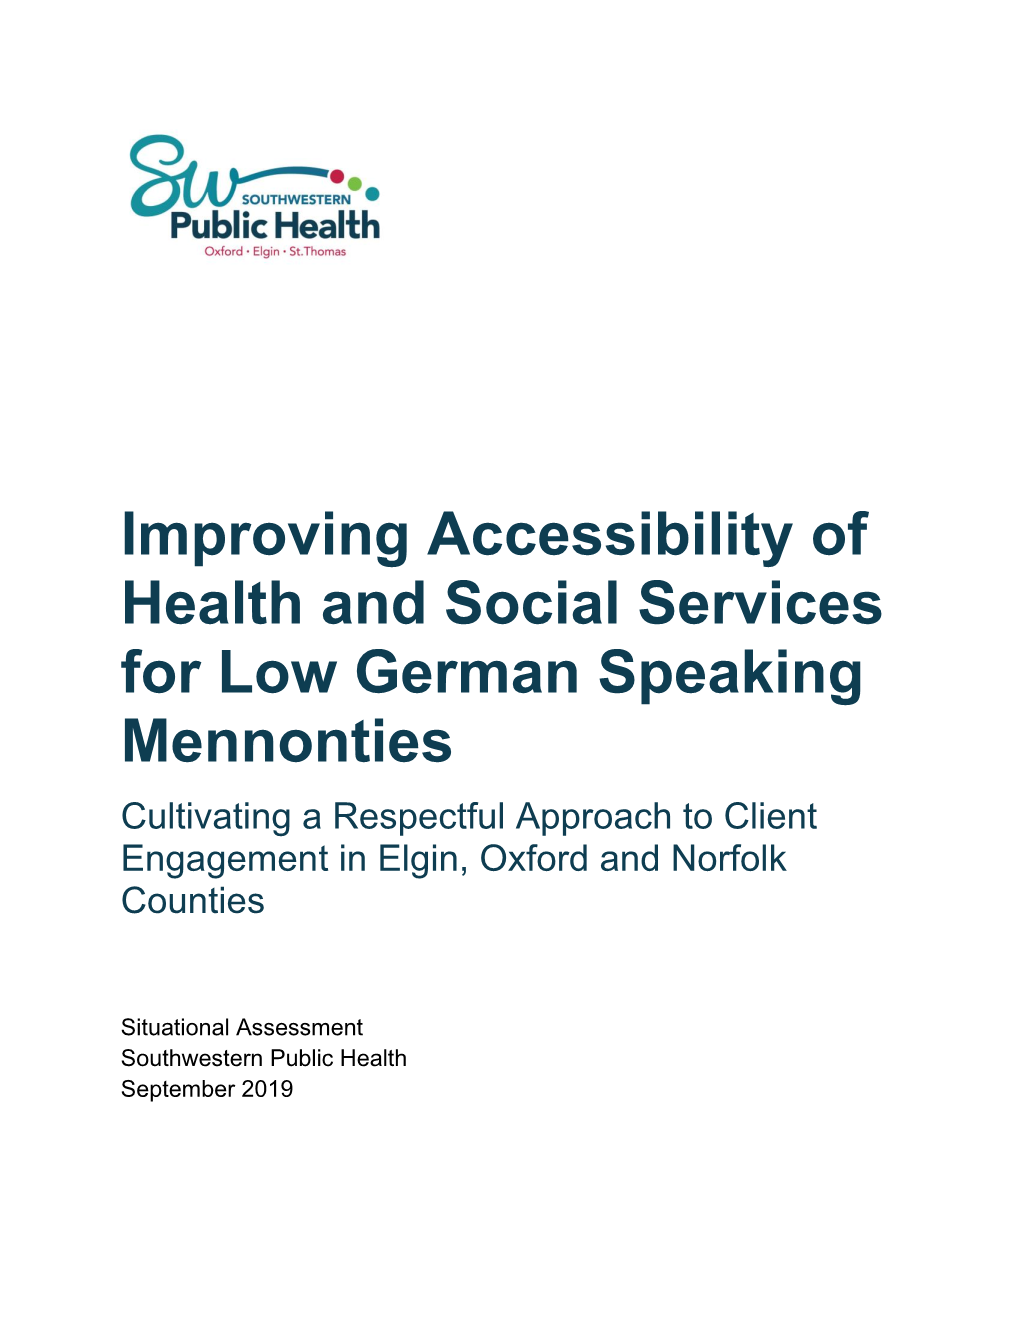 Improving Accessibility of Health and Social Services for Low German